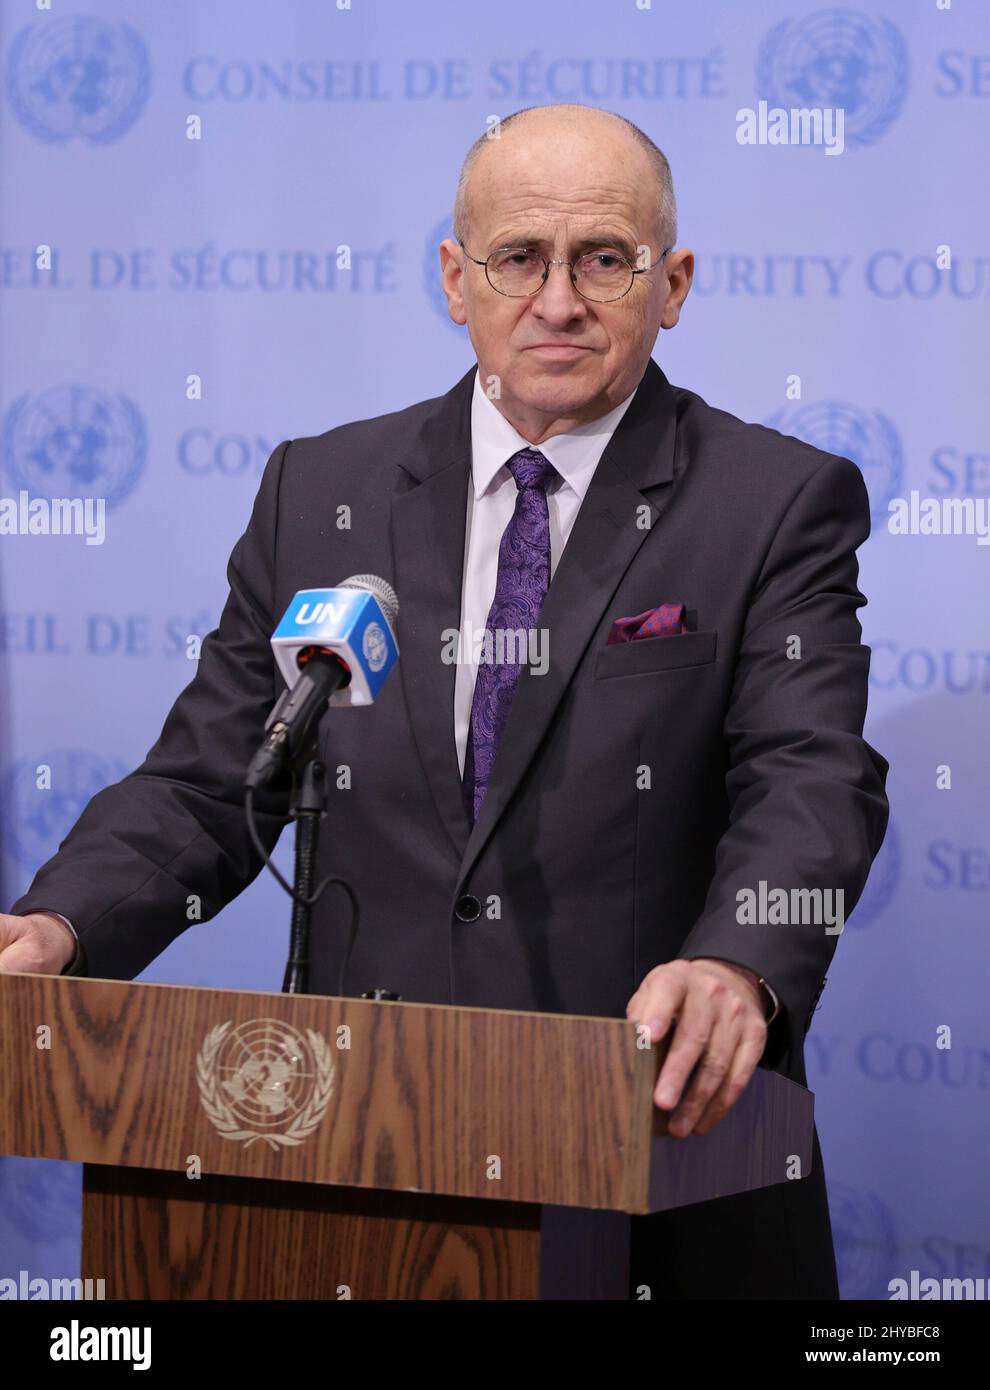 United Nations, New York, USA, March 14, 2022 - Zbigniew Rau, Chairperson-in-Office of the Organization for Security and Cooperation in Europe and Minister for Foreign Affairs of Poland, briefs reporters after the Security Council meeting Today at the UN Headquarters in New York City. Photo: Luiz Rampelotto/EuropaNewswire PHOTO CREDIT MANDATORY. Stock Photo